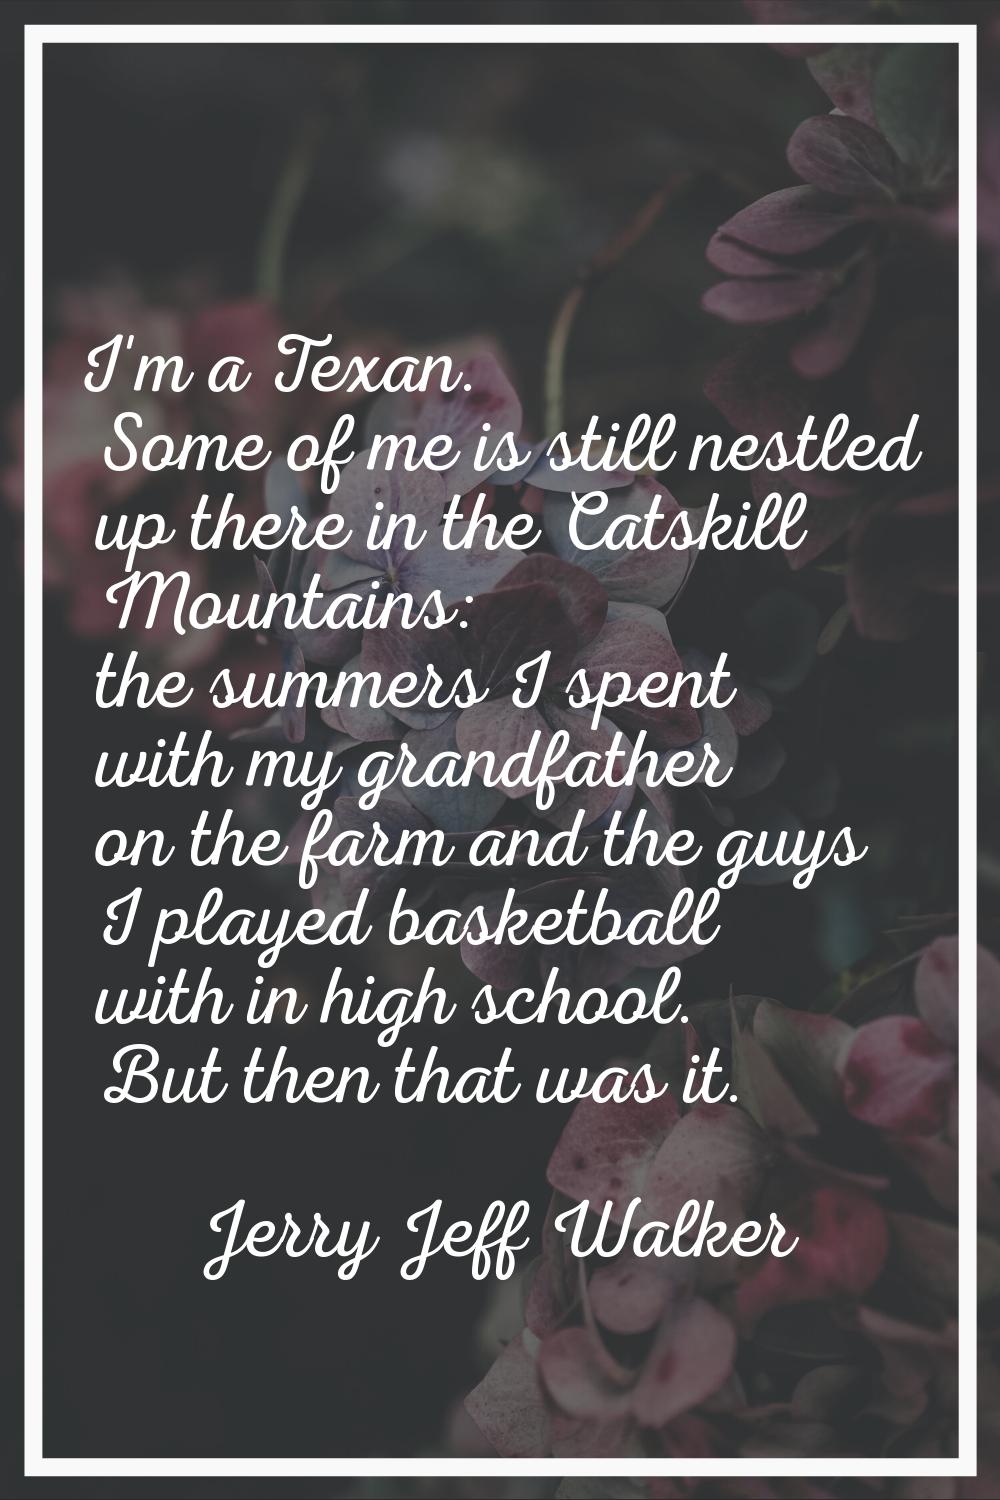 I'm a Texan. Some of me is still nestled up there in the Catskill Mountains: the summers I spent wi